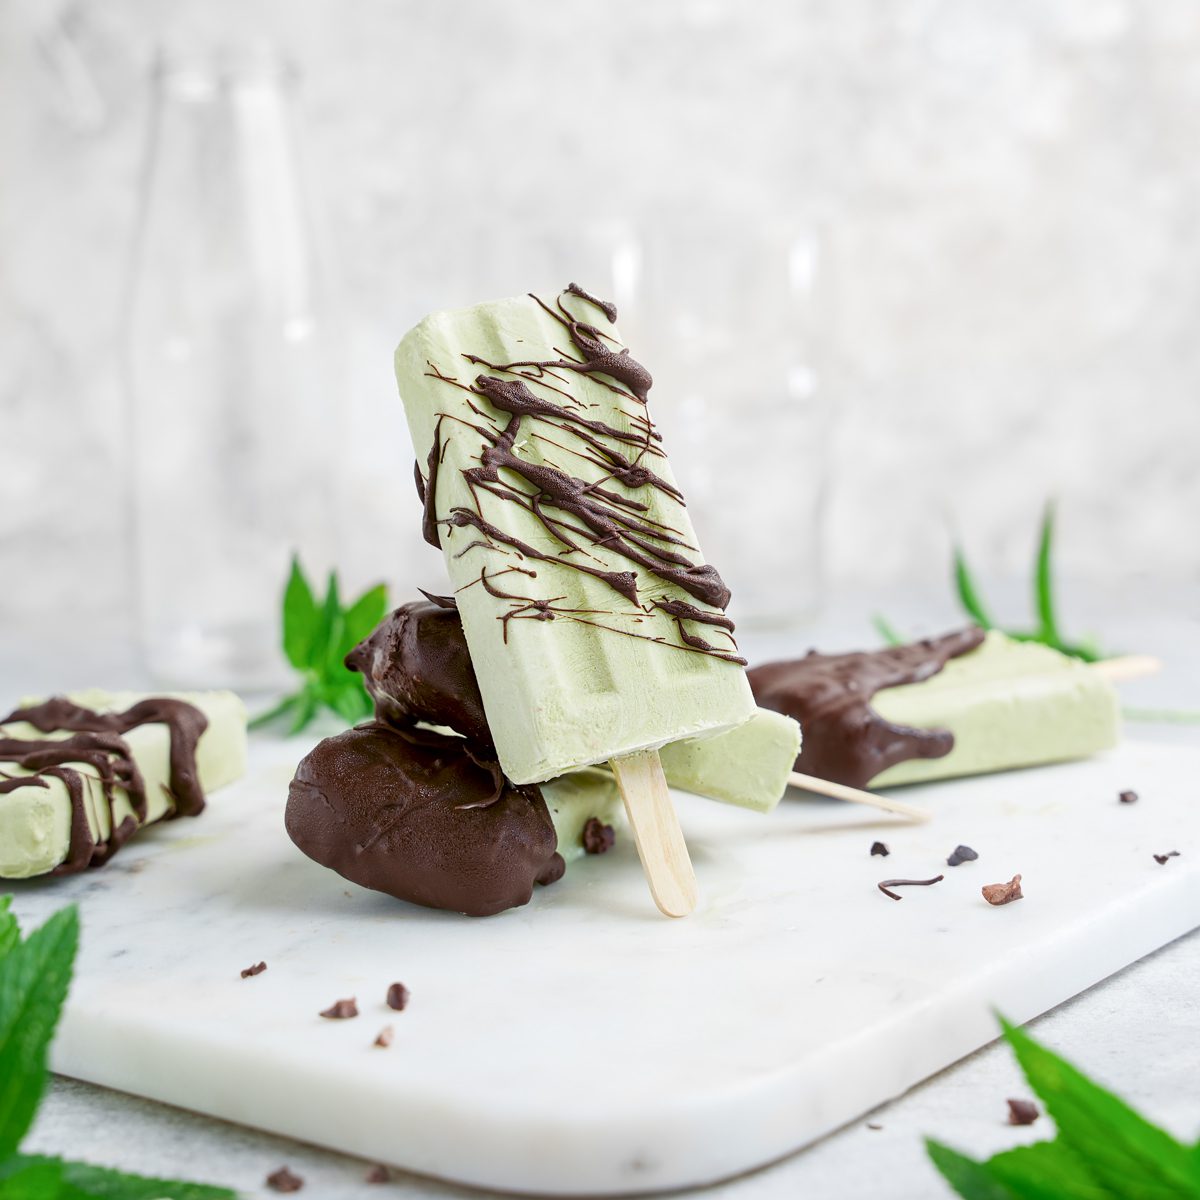 A sugar free matcha mint chocolate popsicle resting o top of a few other mint chocolate chip popiscles on a marble background with fresh mint leaves.